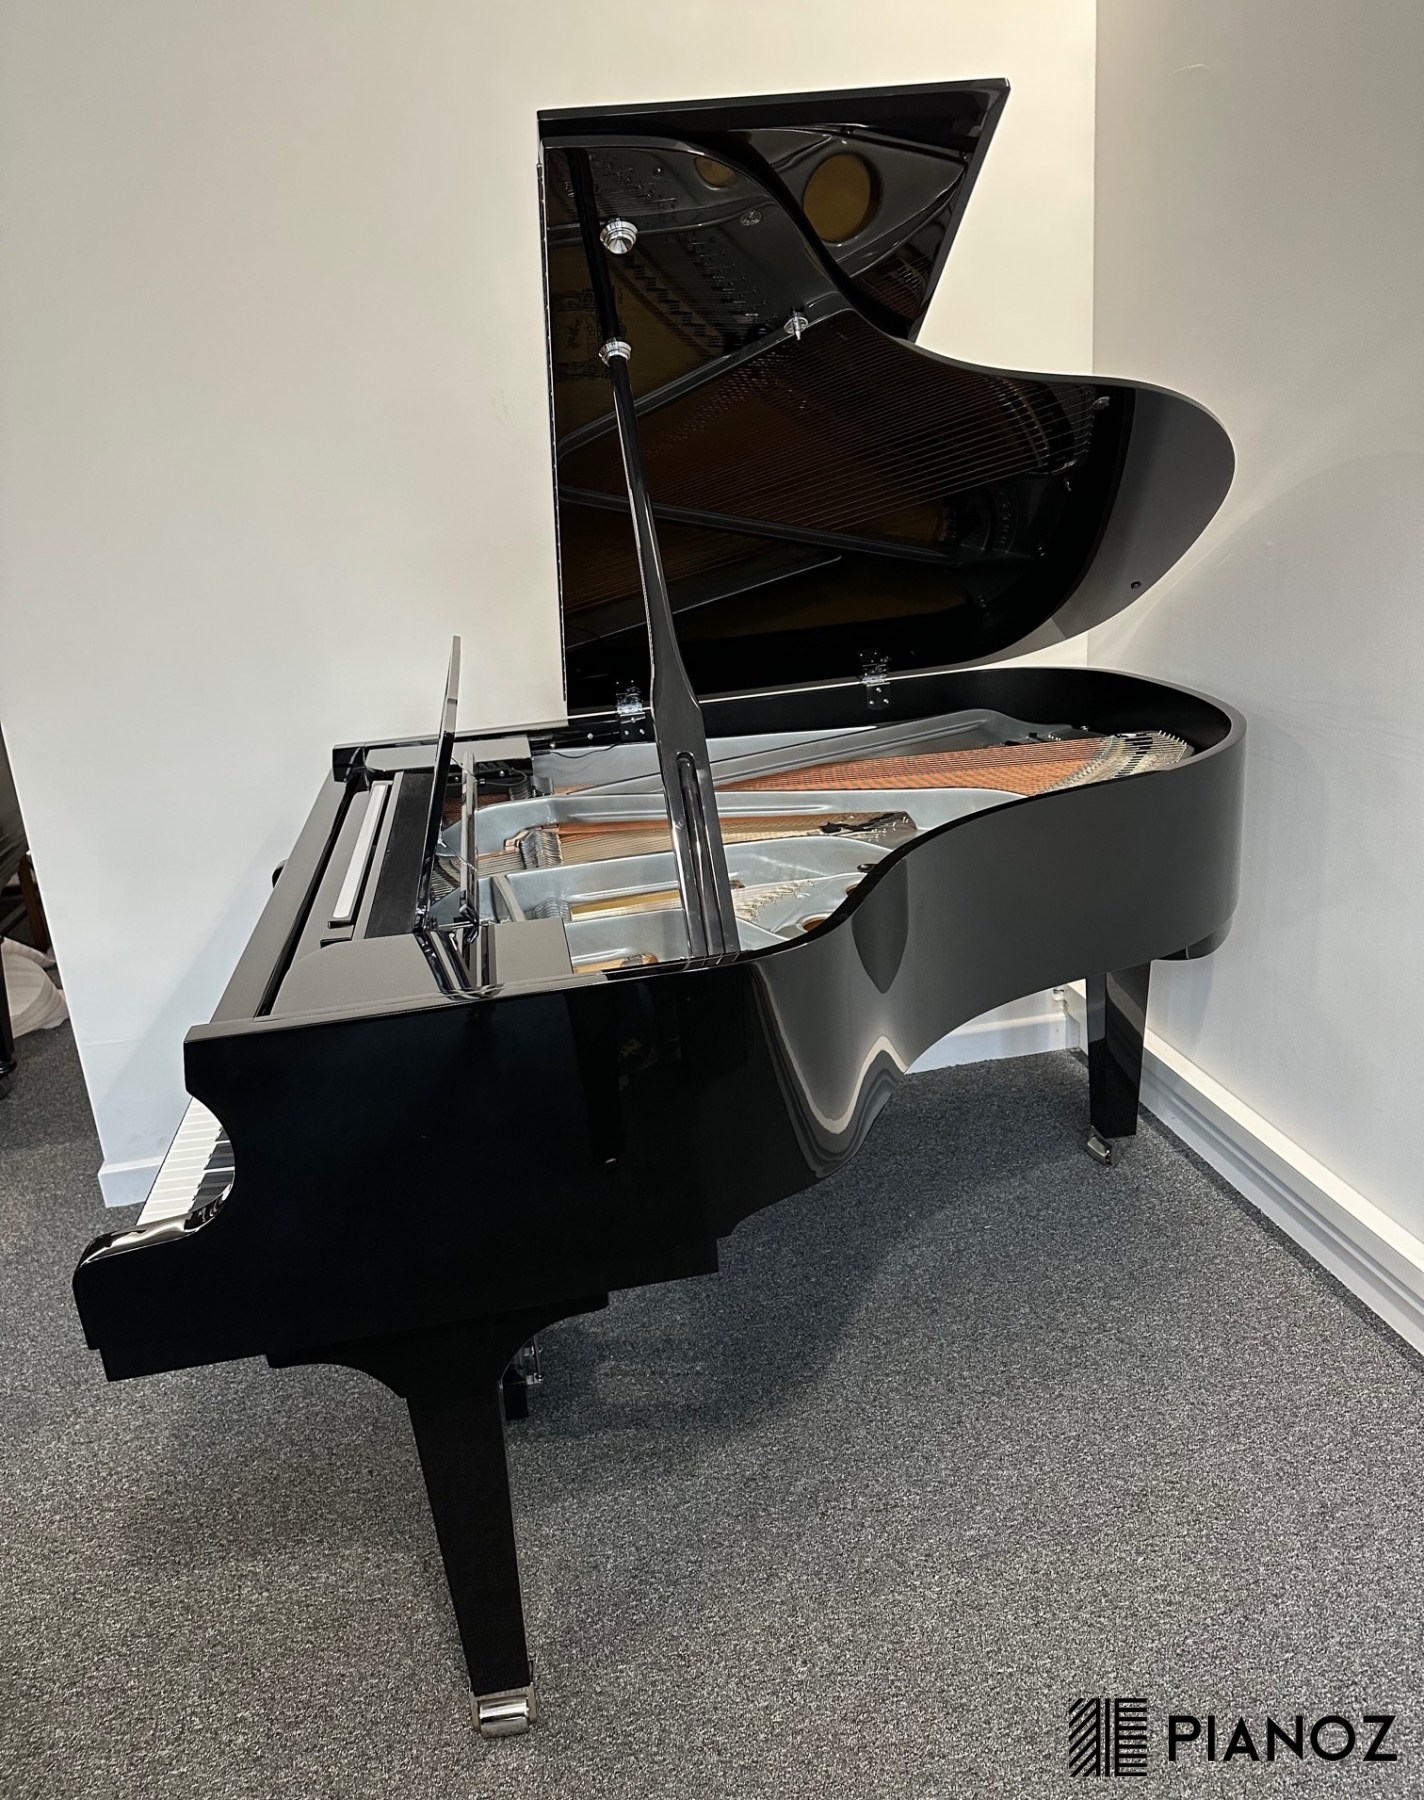 Feurich 179 Dynamic II Grand Piano piano for sale in UK